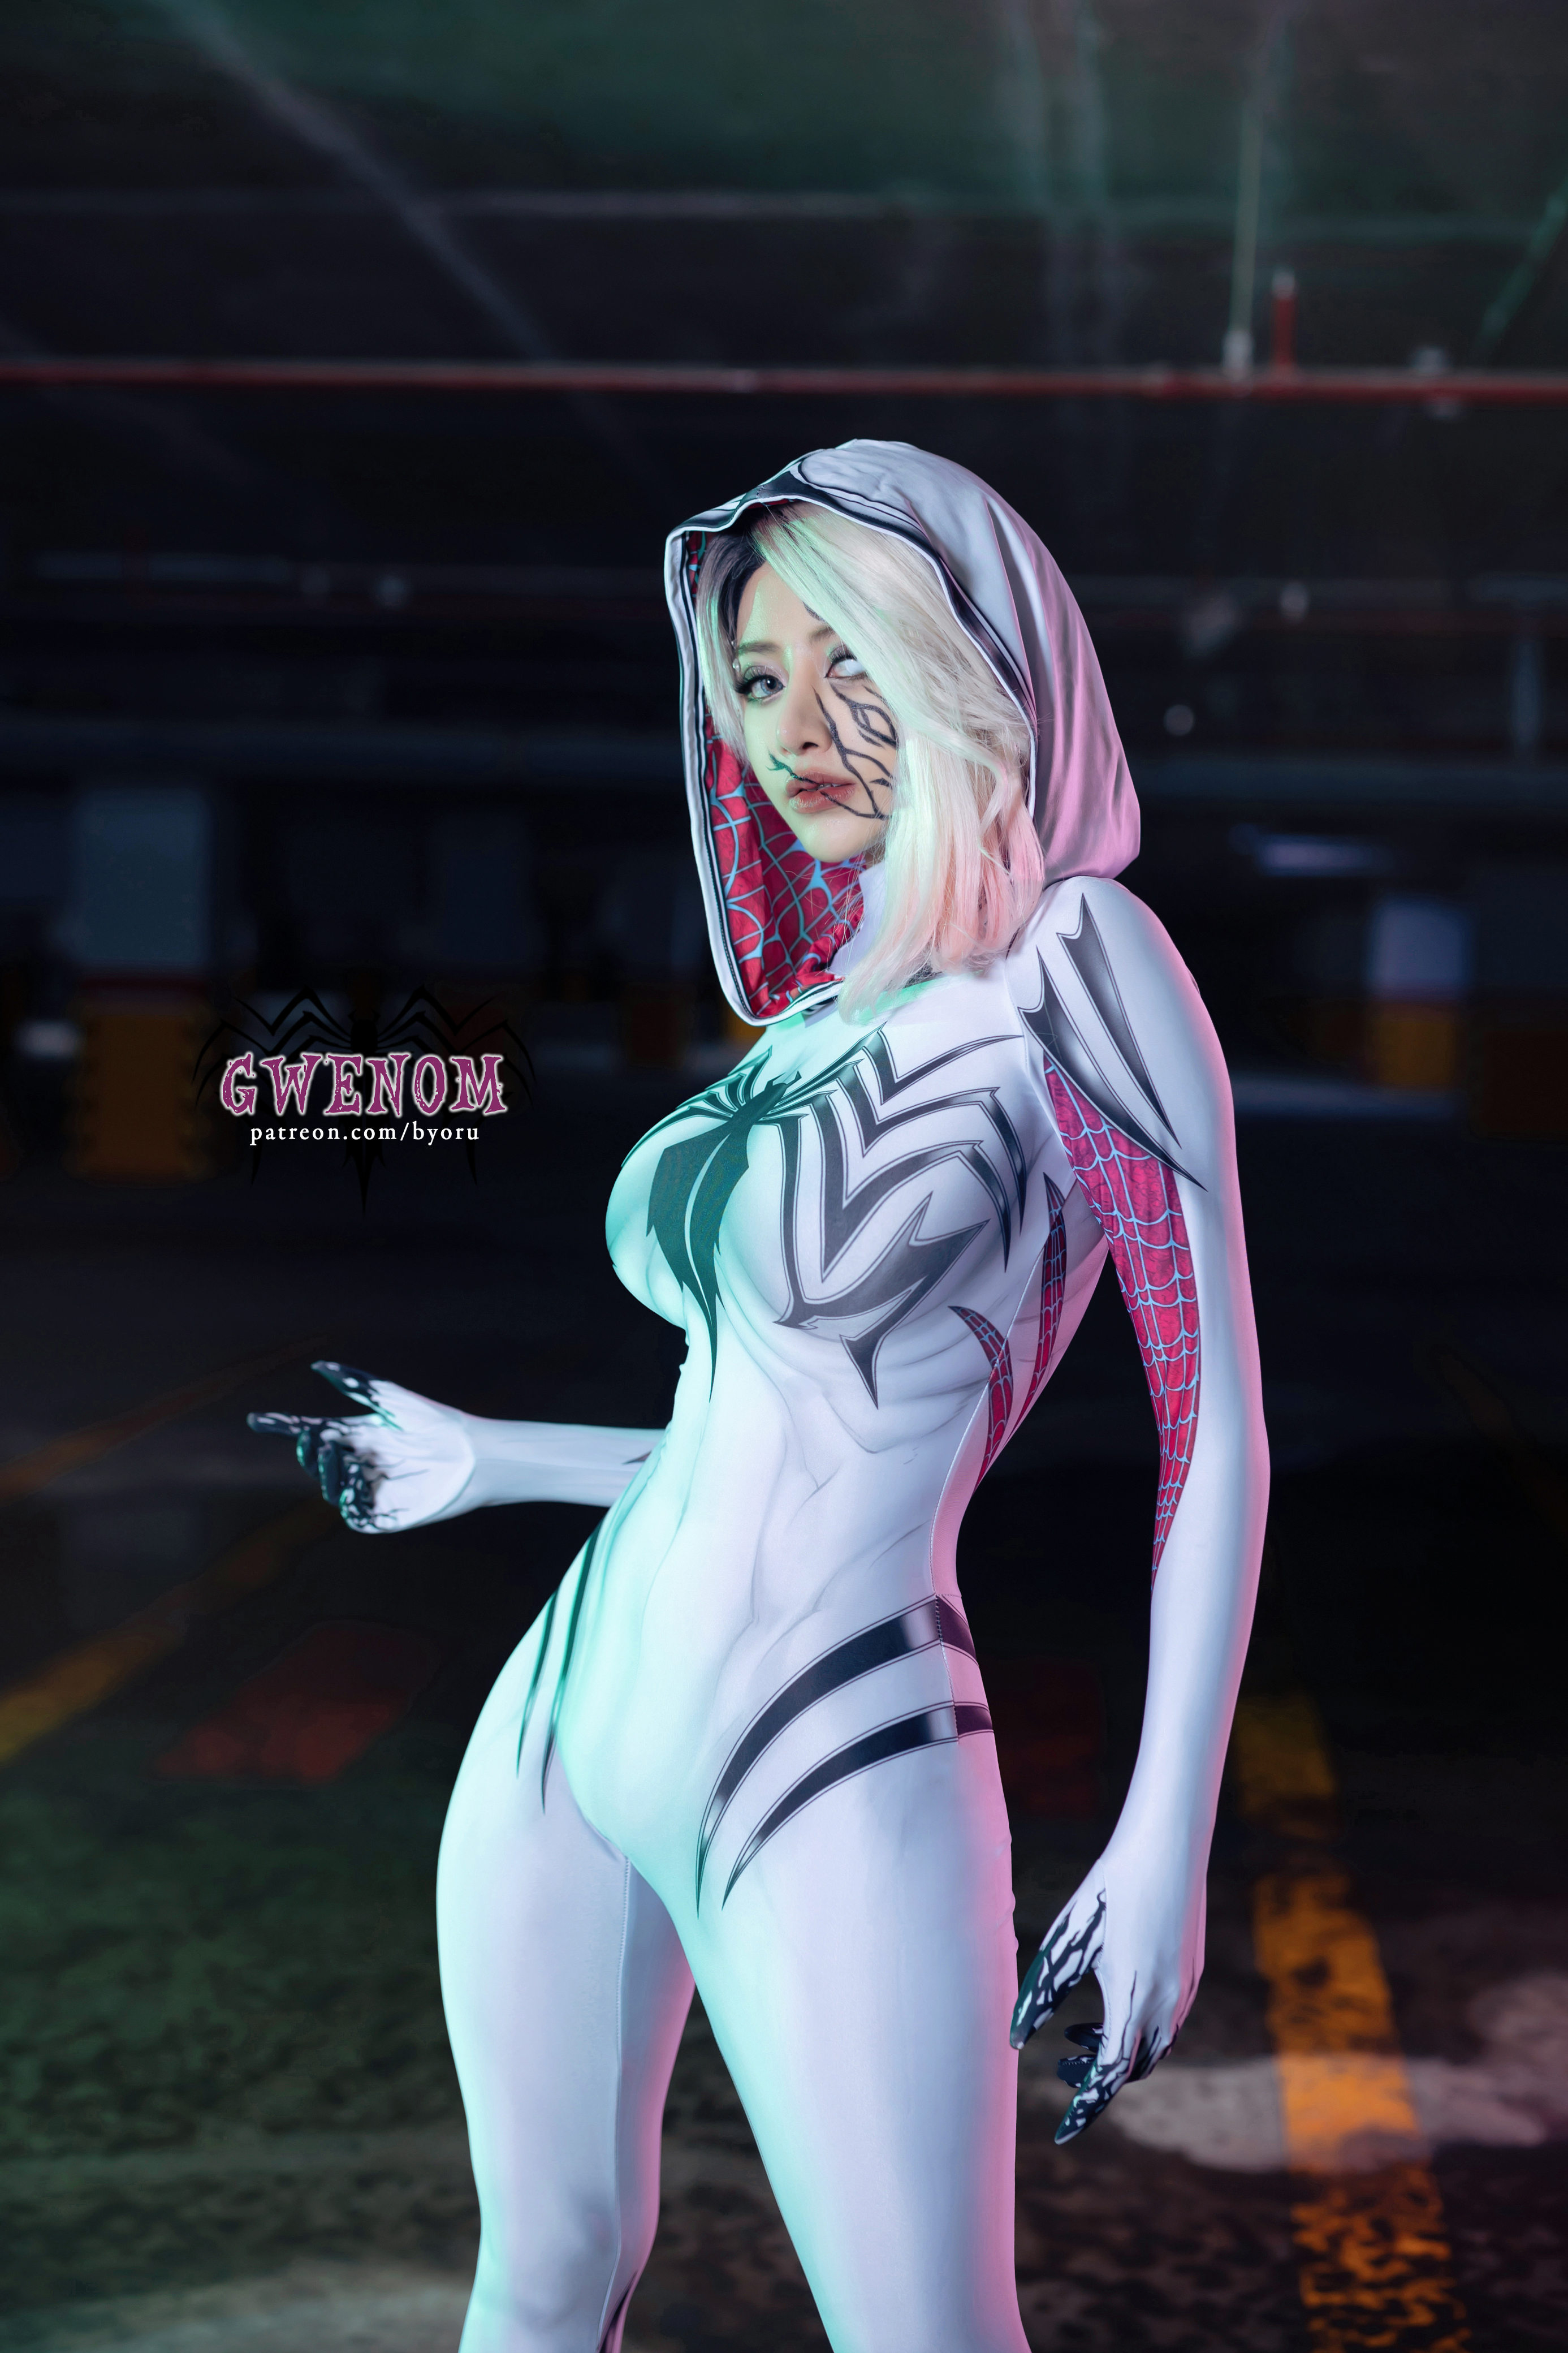 Women Model Cosplay Parking Gwenom Gwen Stacy Costumes Marvel Comics Looking At Viewer 2773x4160